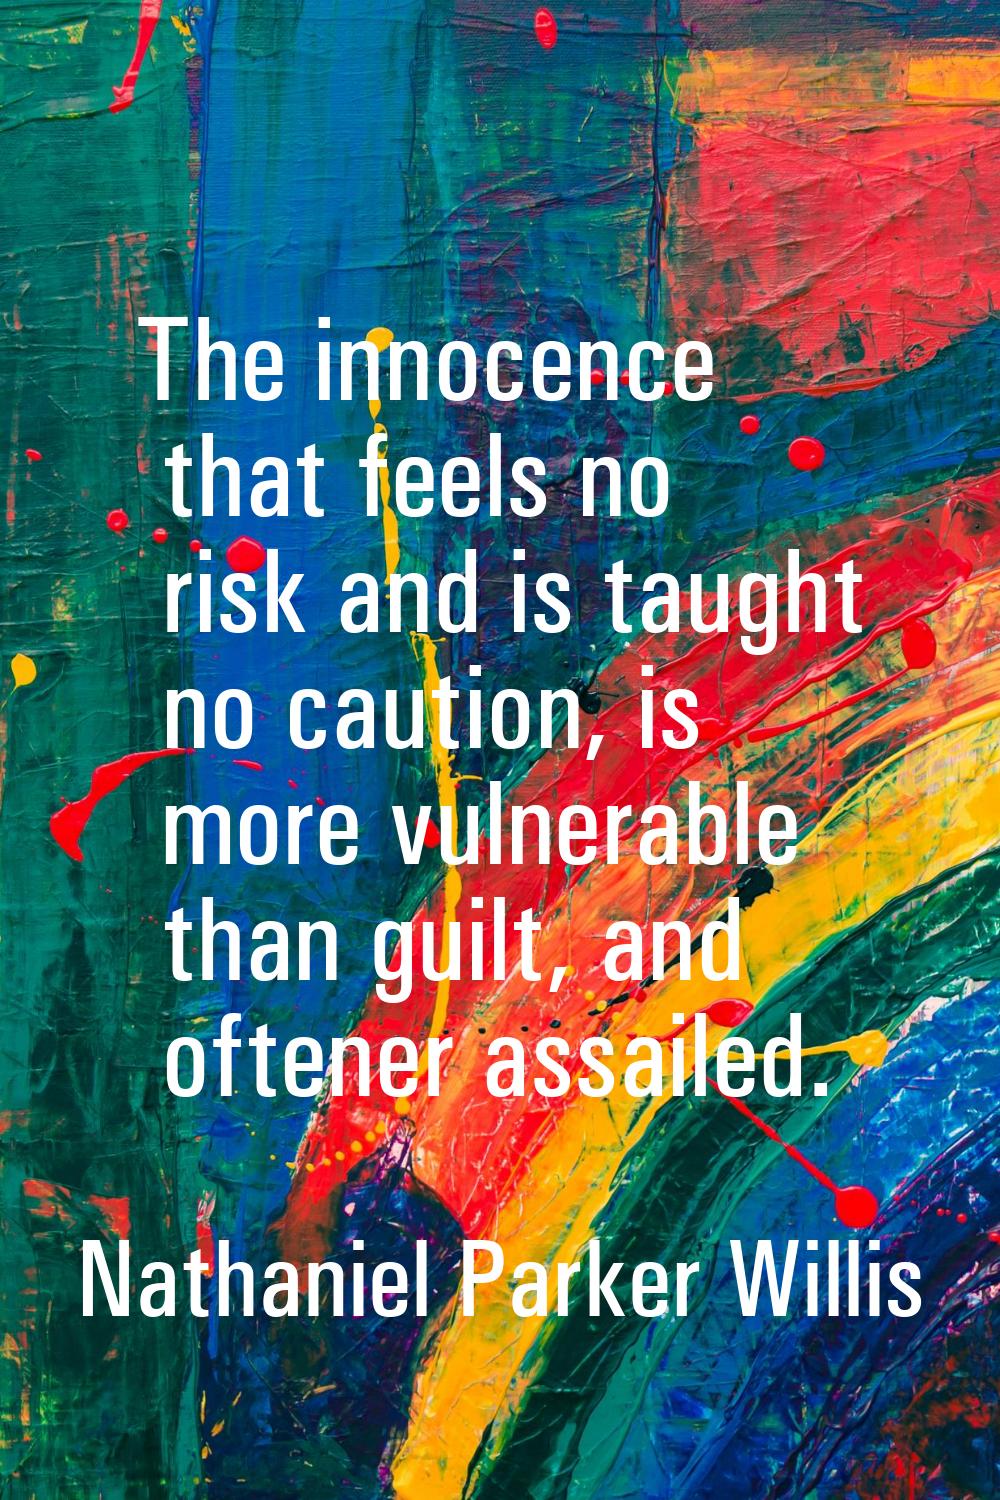 The innocence that feels no risk and is taught no caution, is more vulnerable than guilt, and often